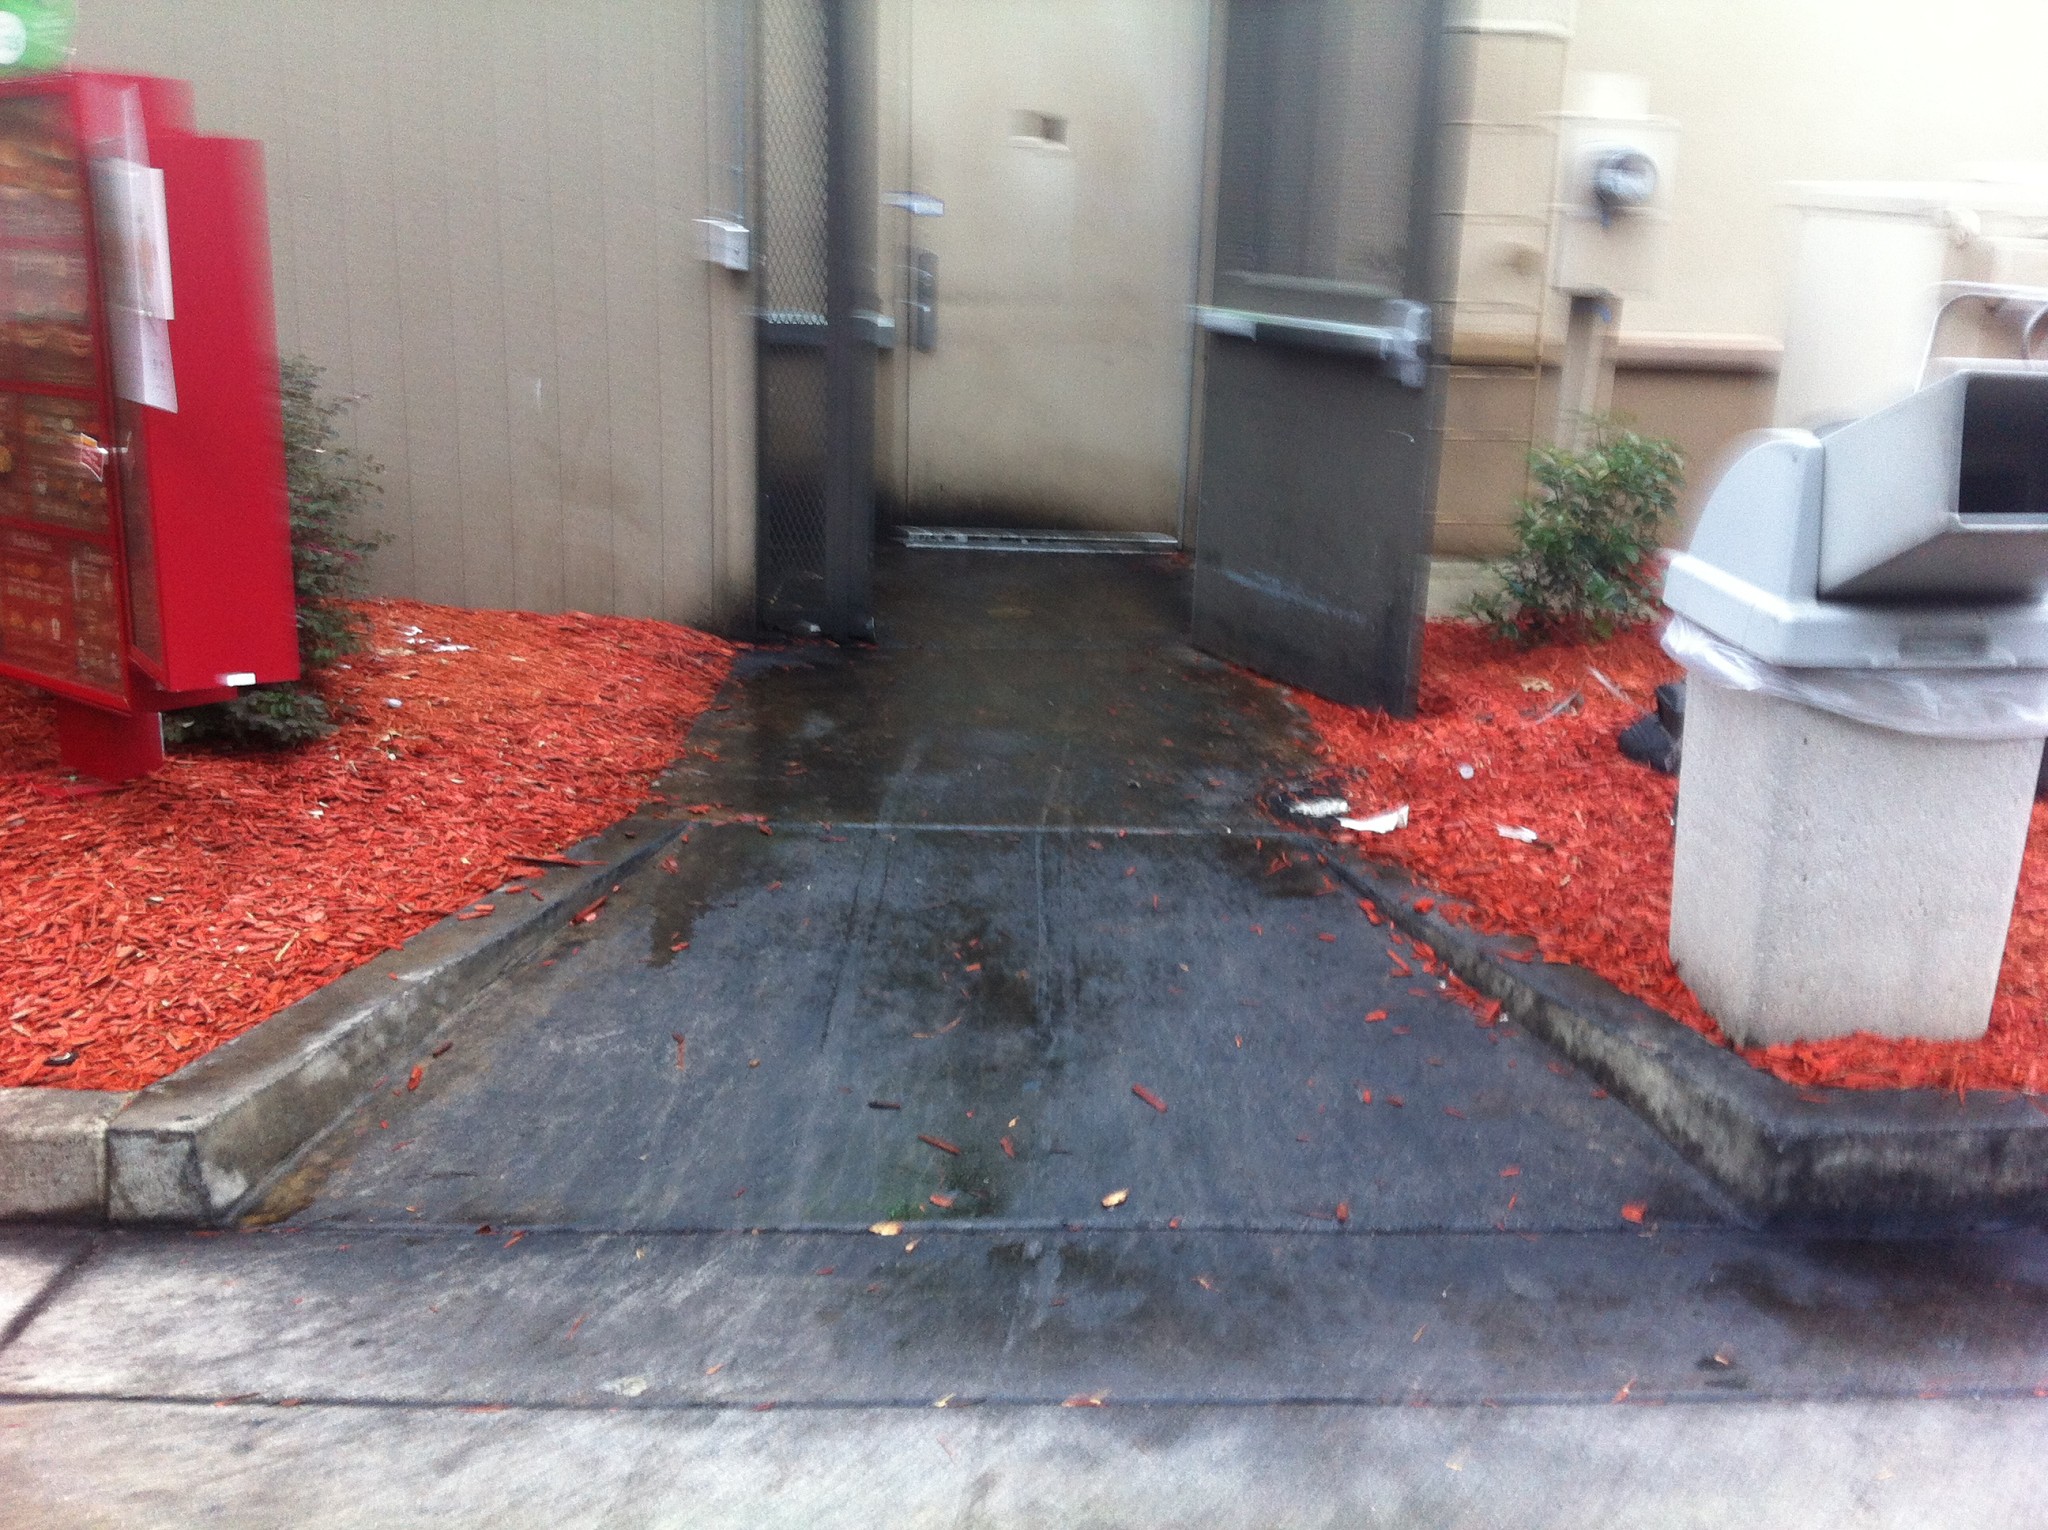 Dumpster Area Cleaning Chicago Before